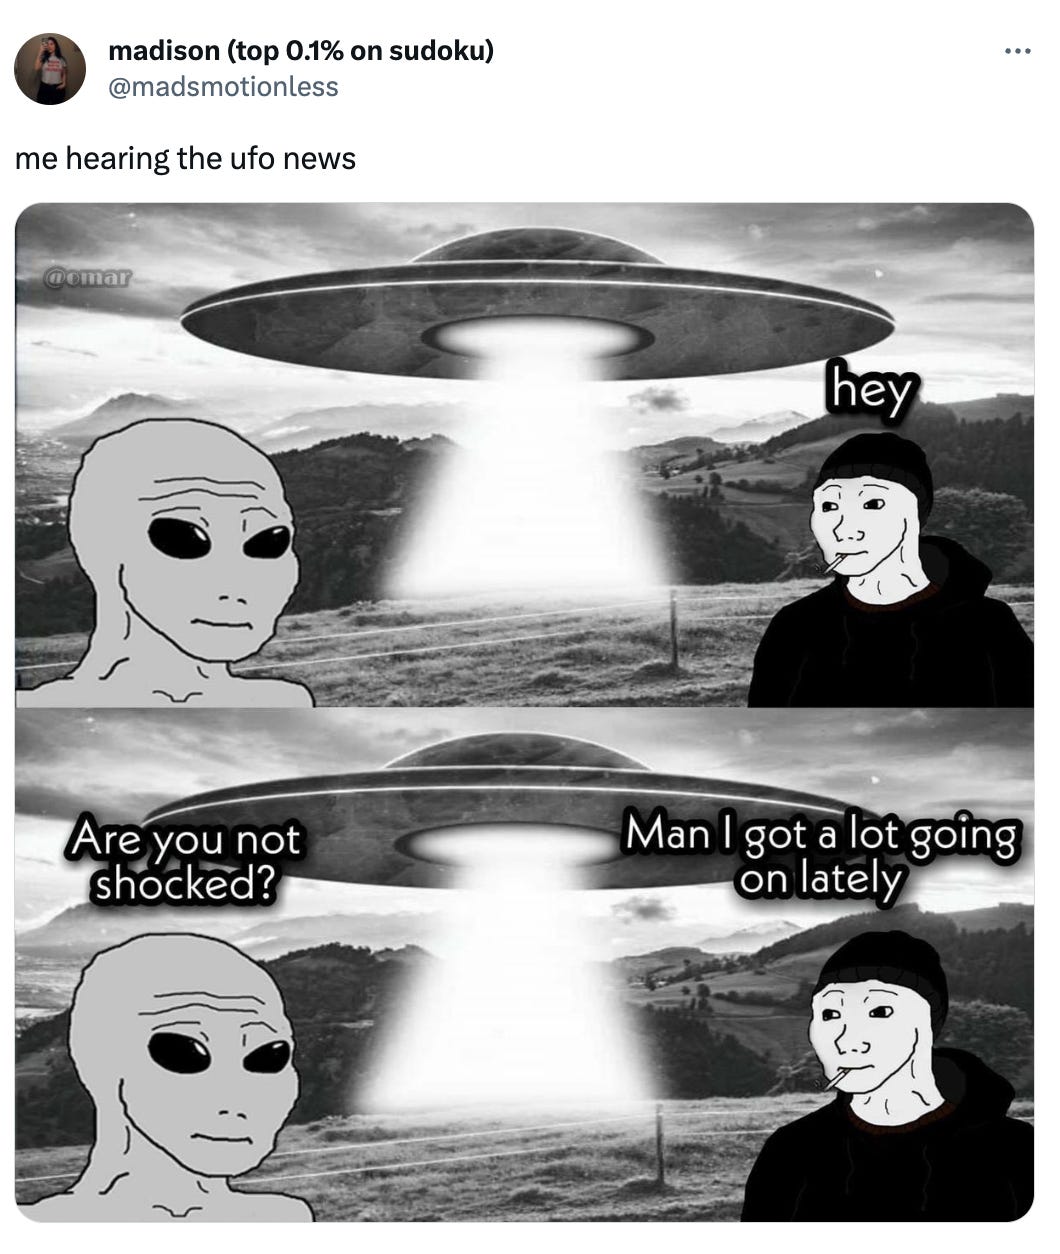 A tweet from @madsmotionless that reads "me hearing the ufo news"; it features an image repeated twice of an alien wojak meme facing a human wojak meme, with a large spaceship between them. The first image the human wojak says "hey" over his head. The second image the alien wojak says "Are you not shocked?" and the human wojak says "Man I got a lot going on lately"